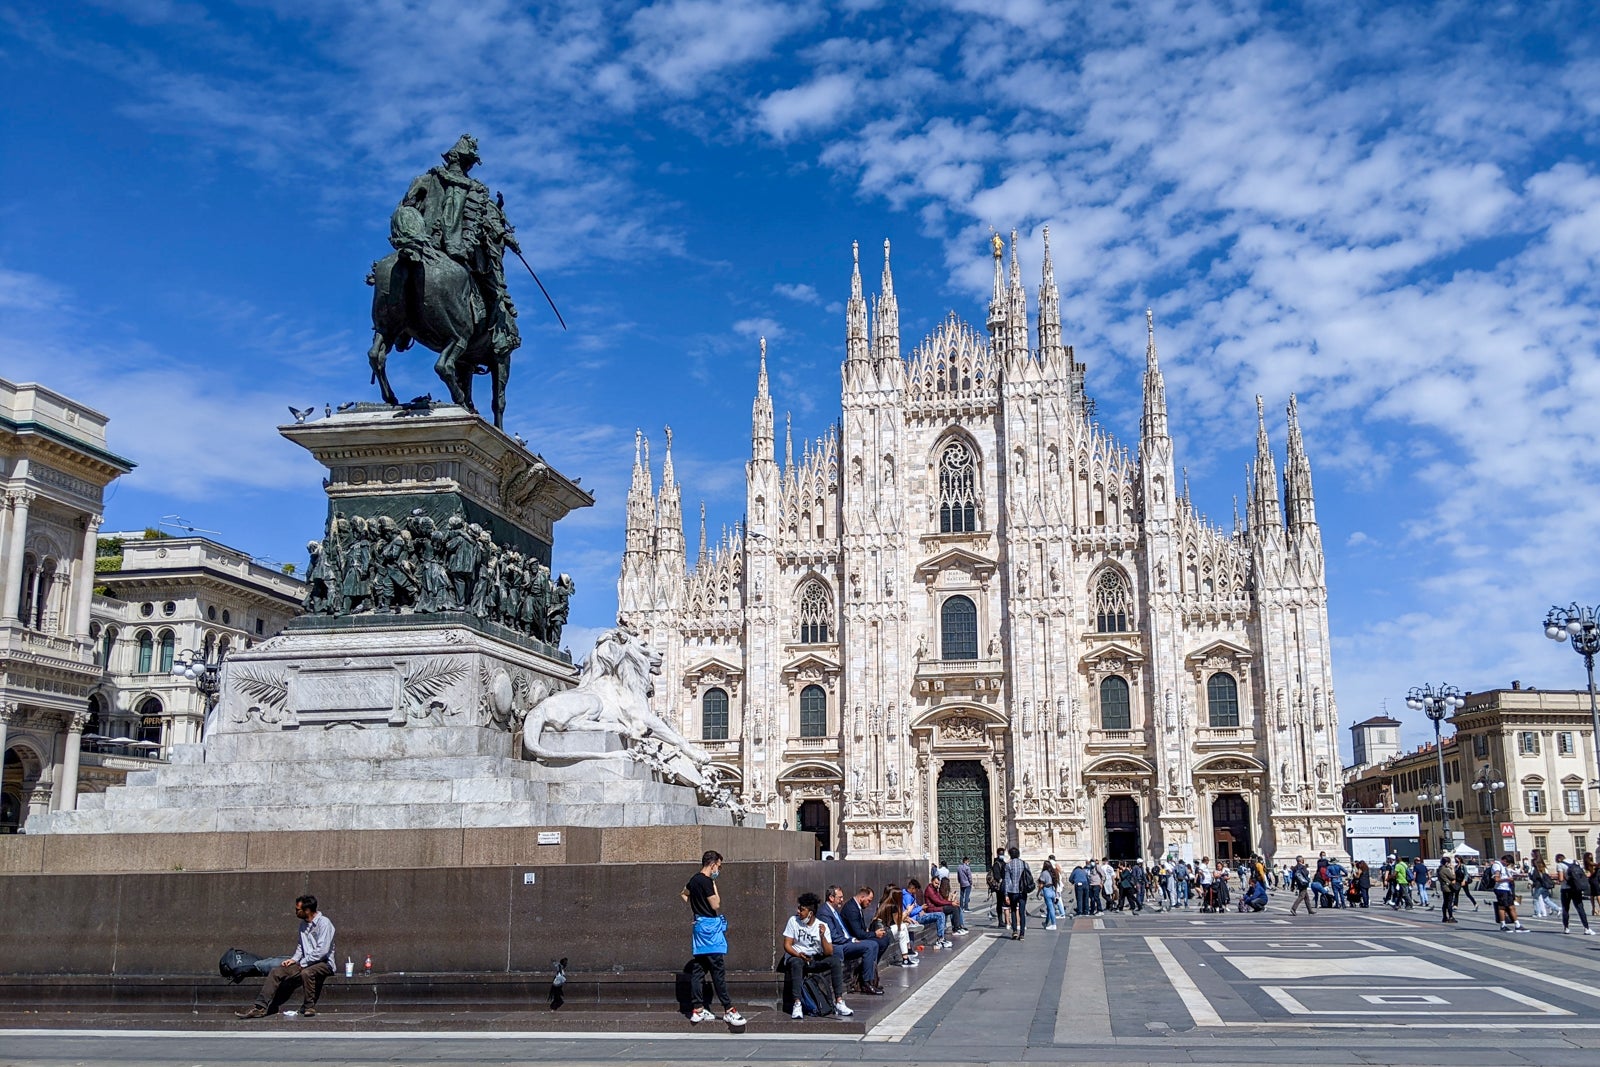 Milan Cathedral in Italy